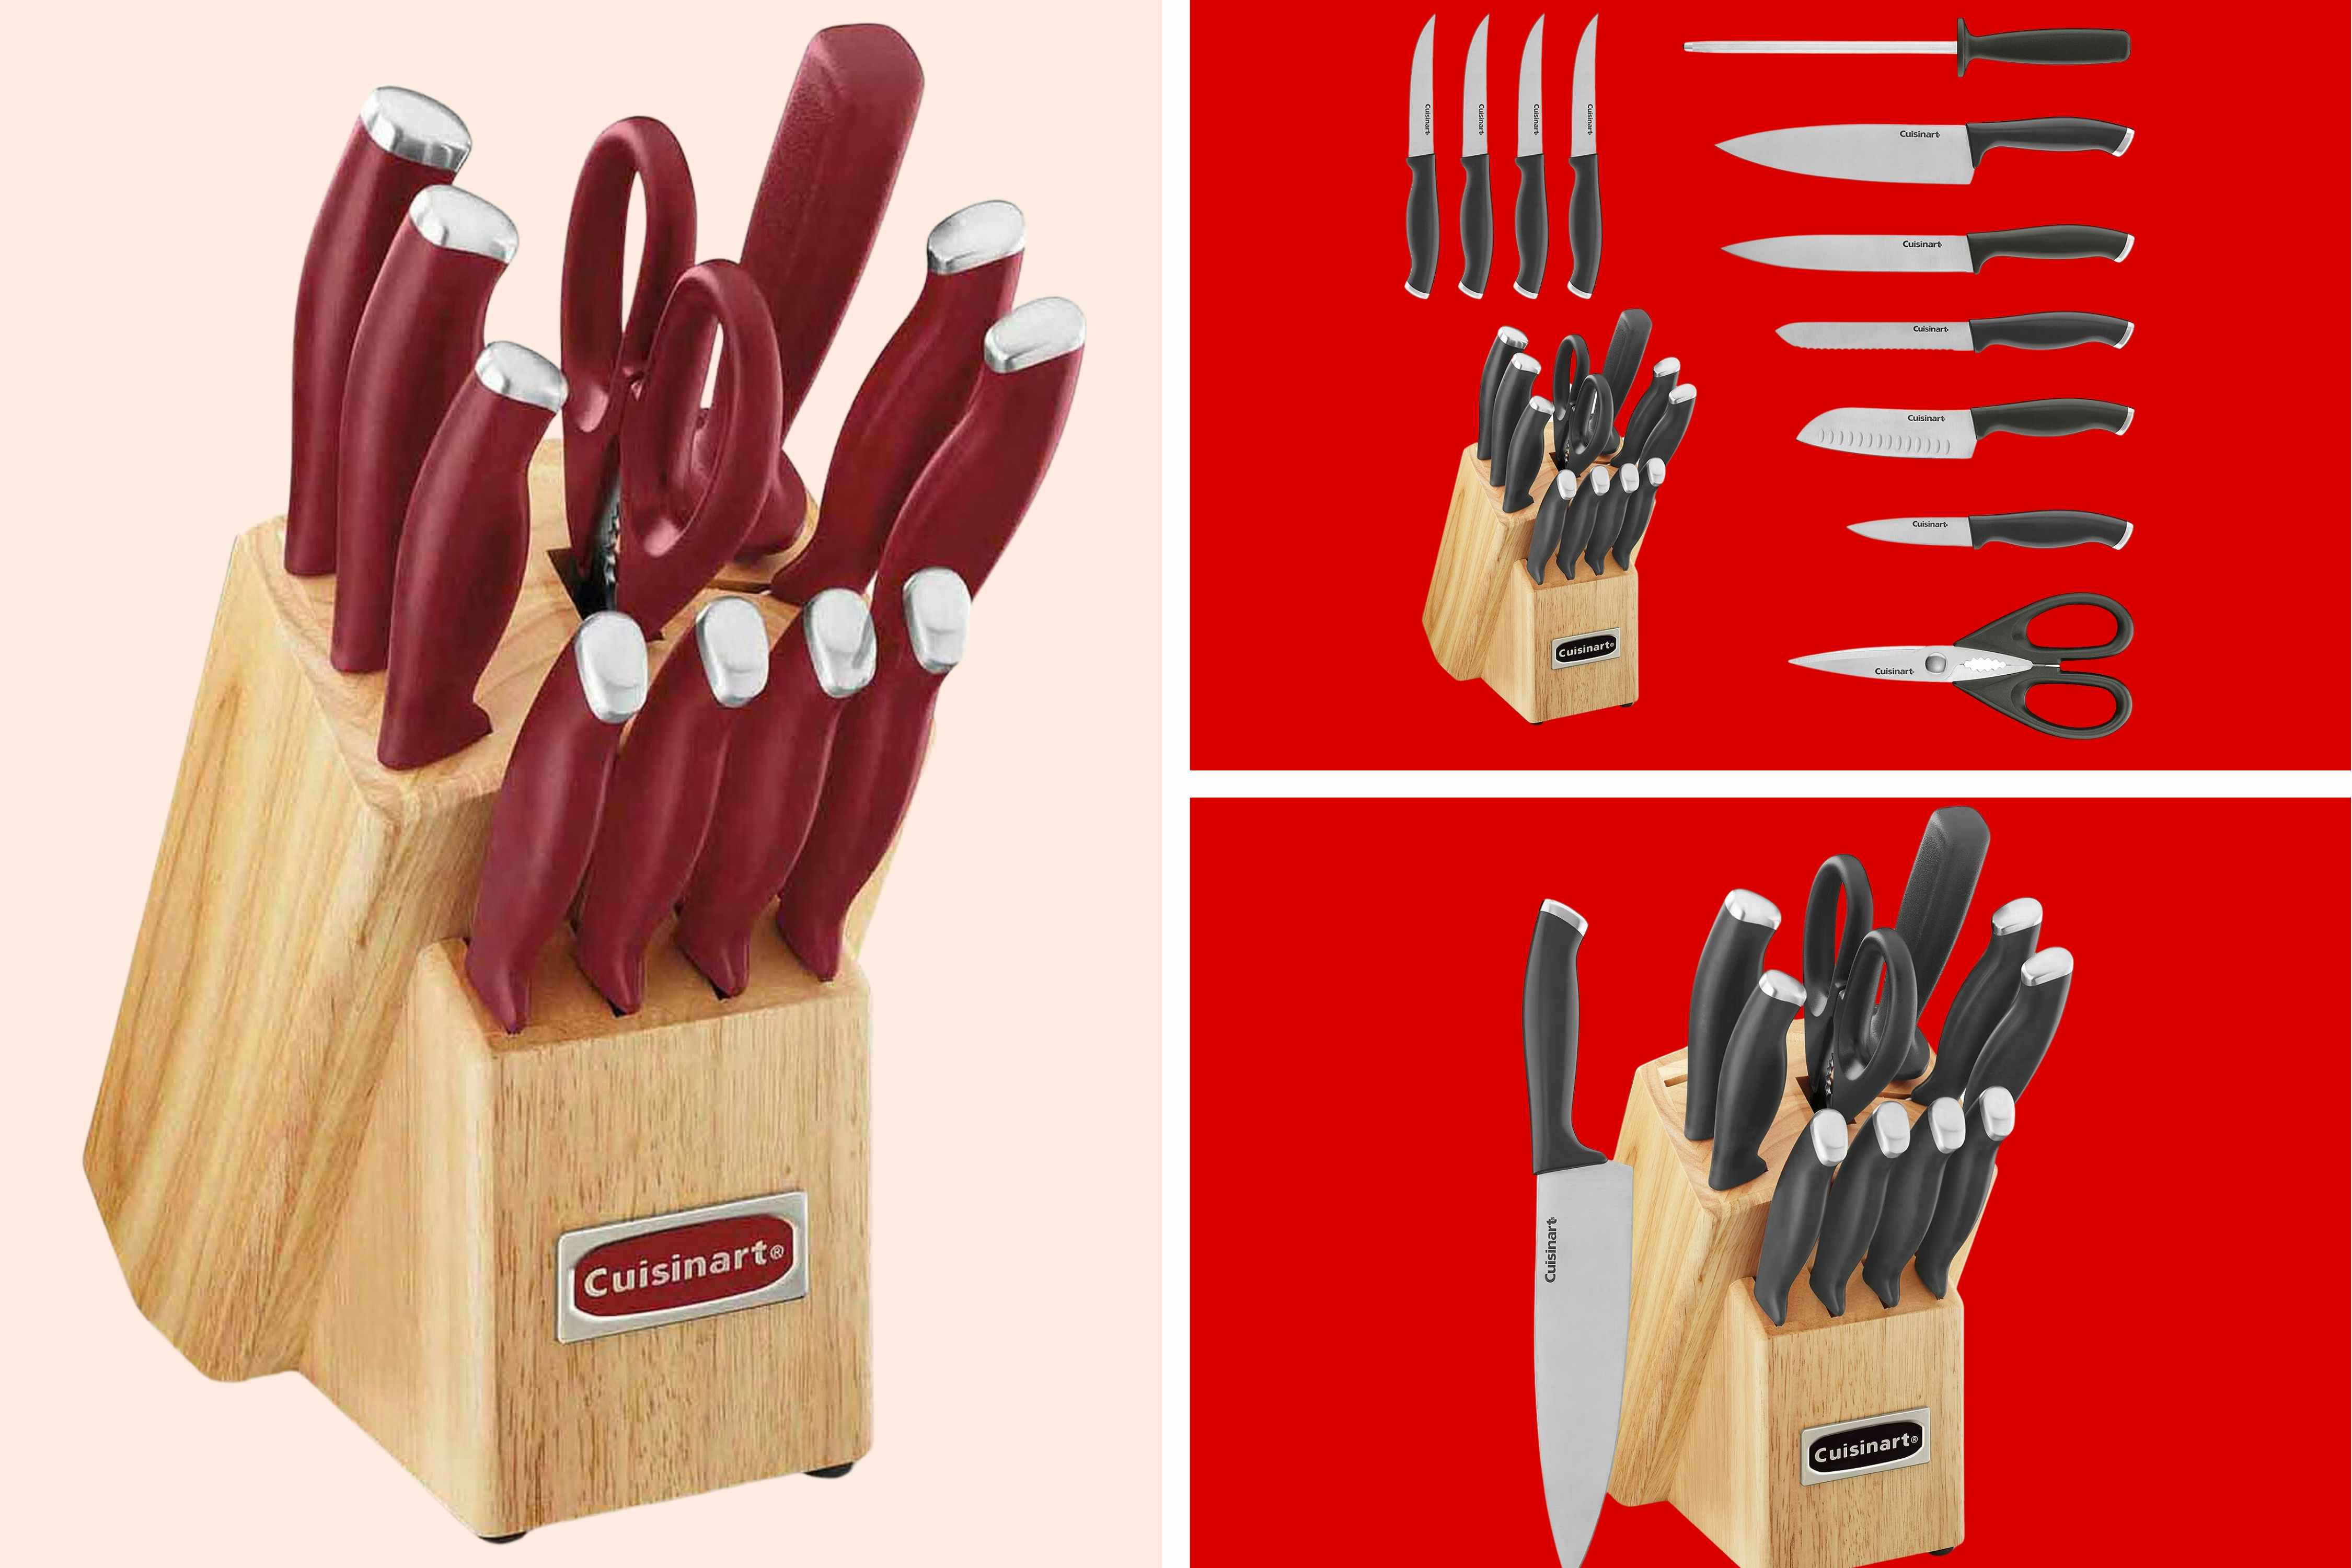 Cuisinart Pro Collection 12-Piece Knife Set, Only $60 at JCPenney